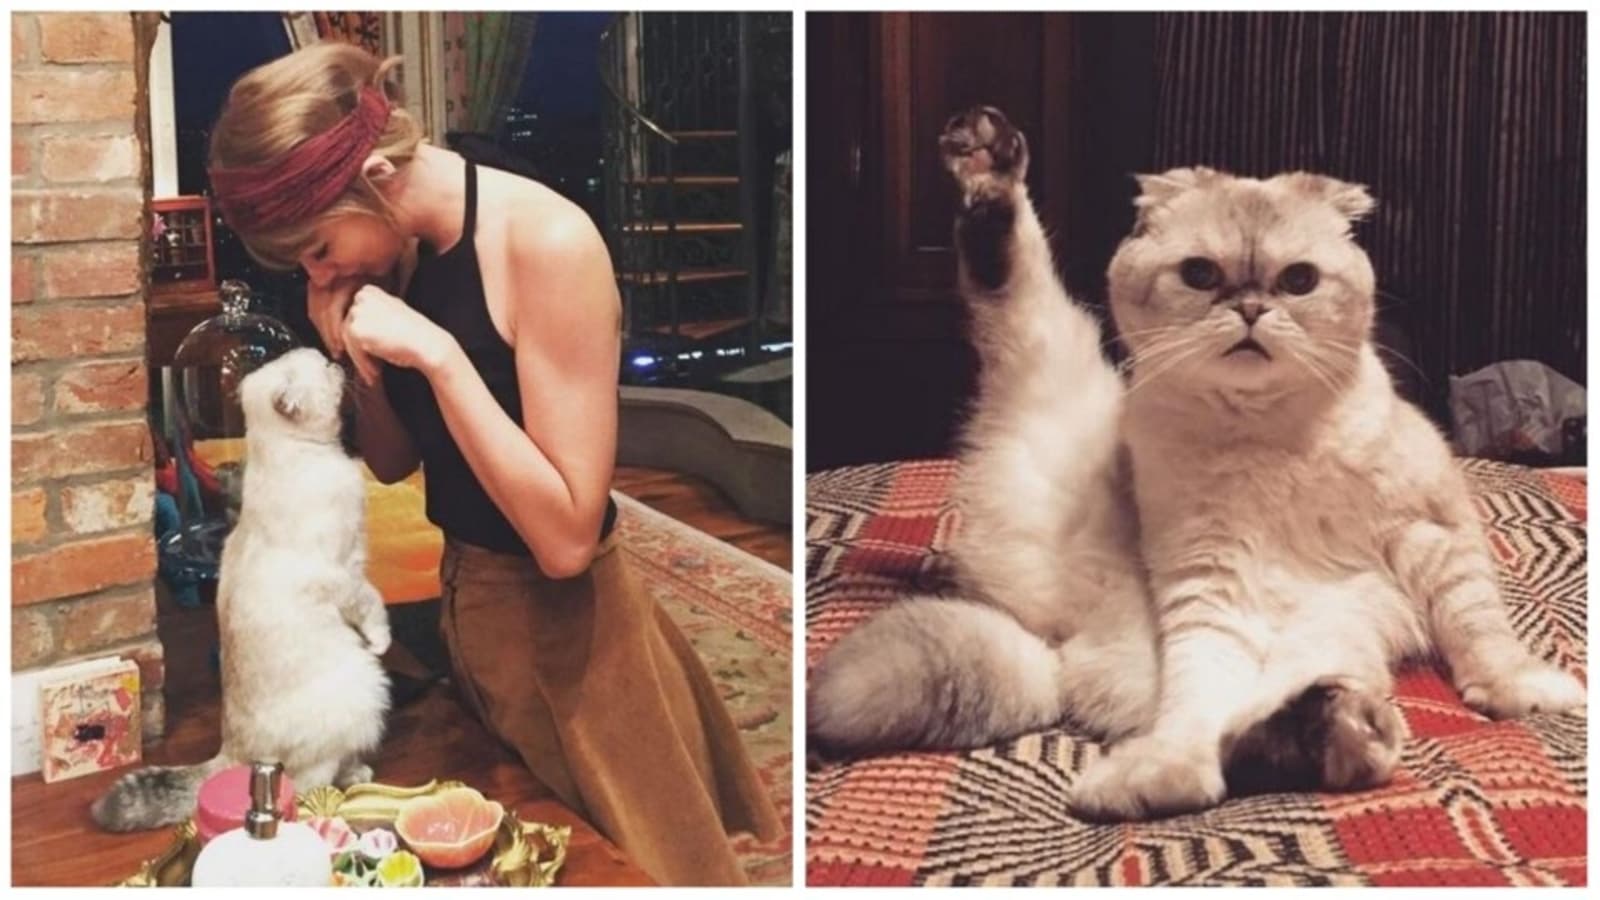 Taylor Swift's cat Olivia Benson is 3rd richest pet in world